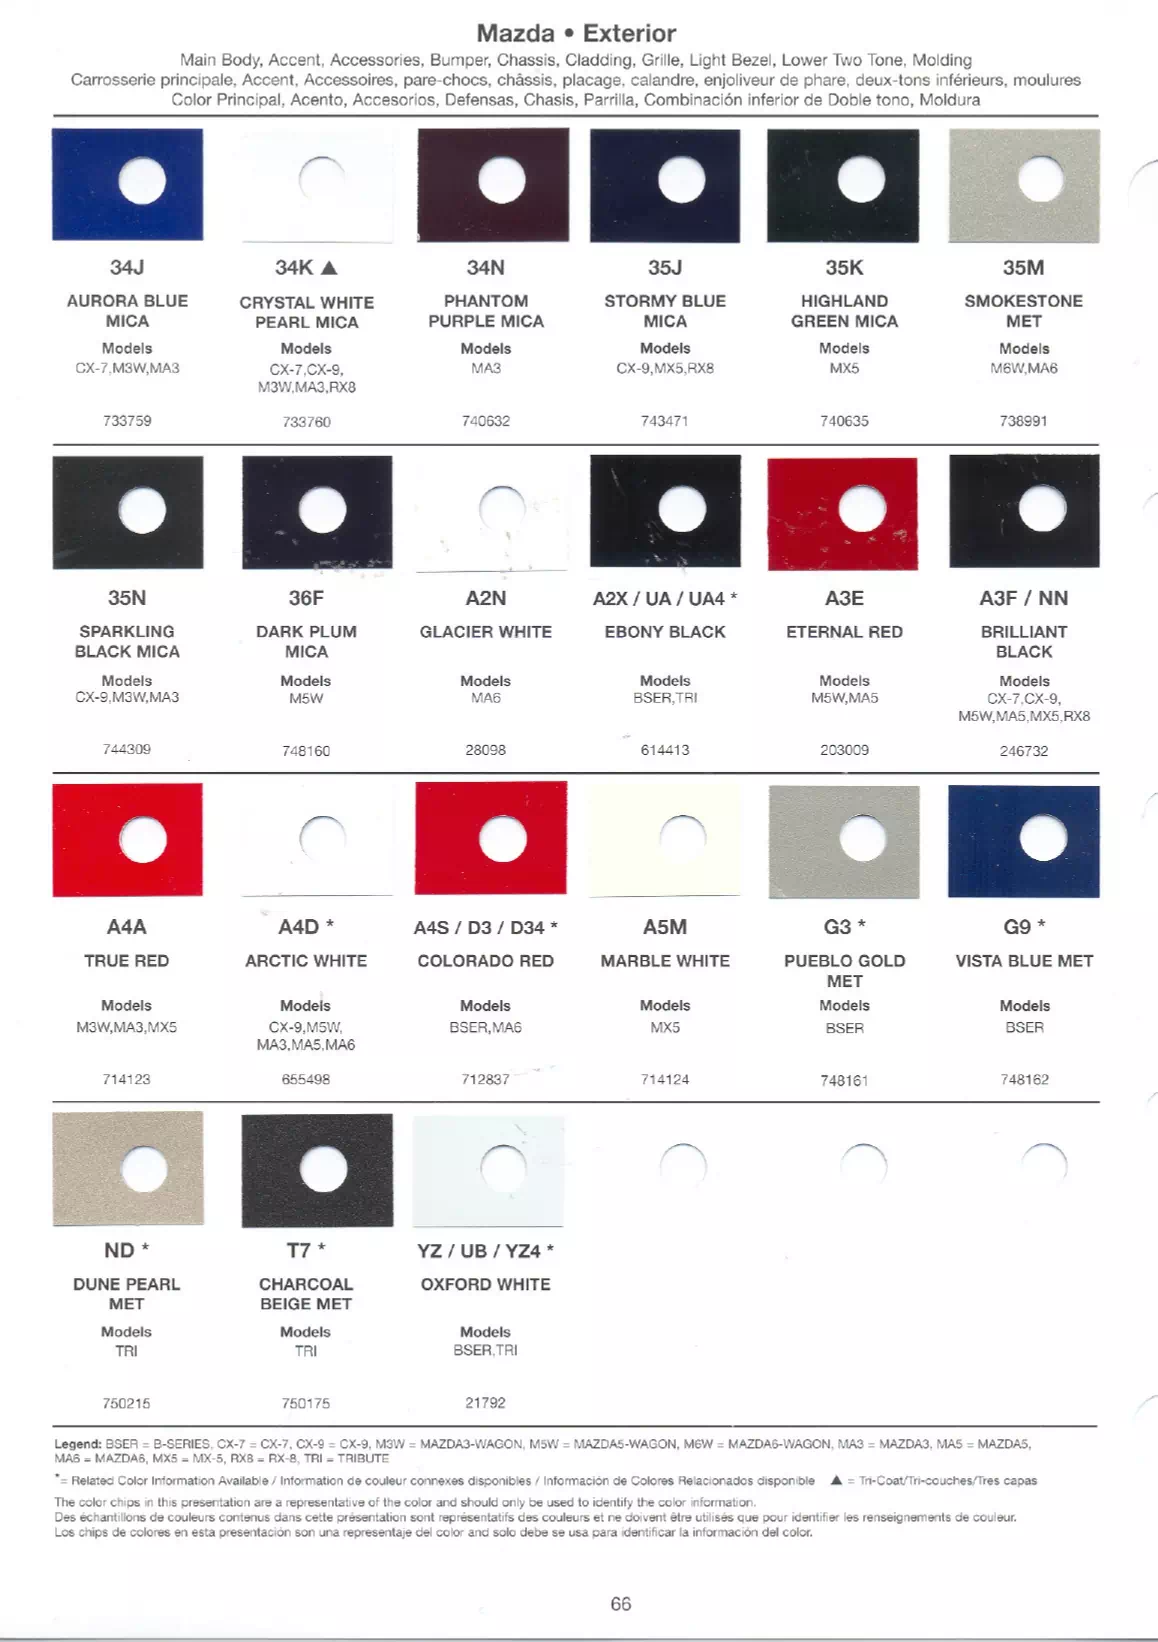 oem paint codes, color names, and paint swatches for 2007 Mazda automobiles.